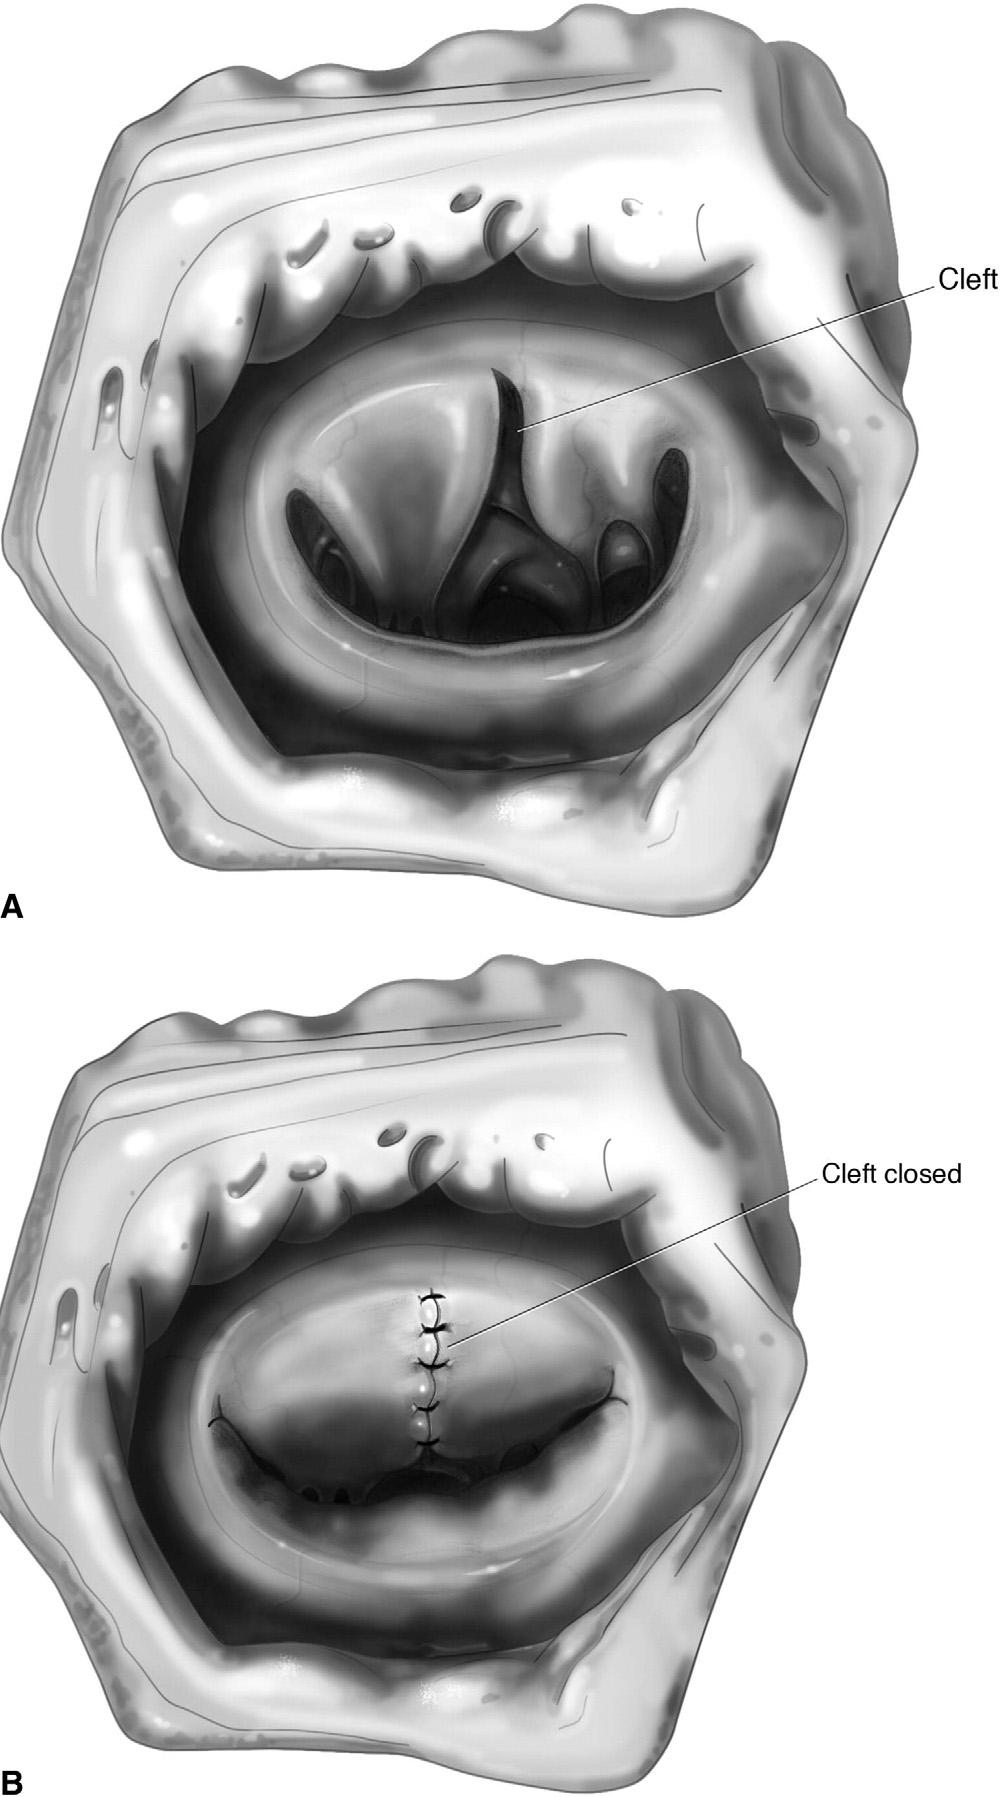 266 R. Hetzer and E.M. Delmo Walter Figure 6 Mitral cleft. (A) A mitral cleft is assessed for the presence of sufficient tissue.